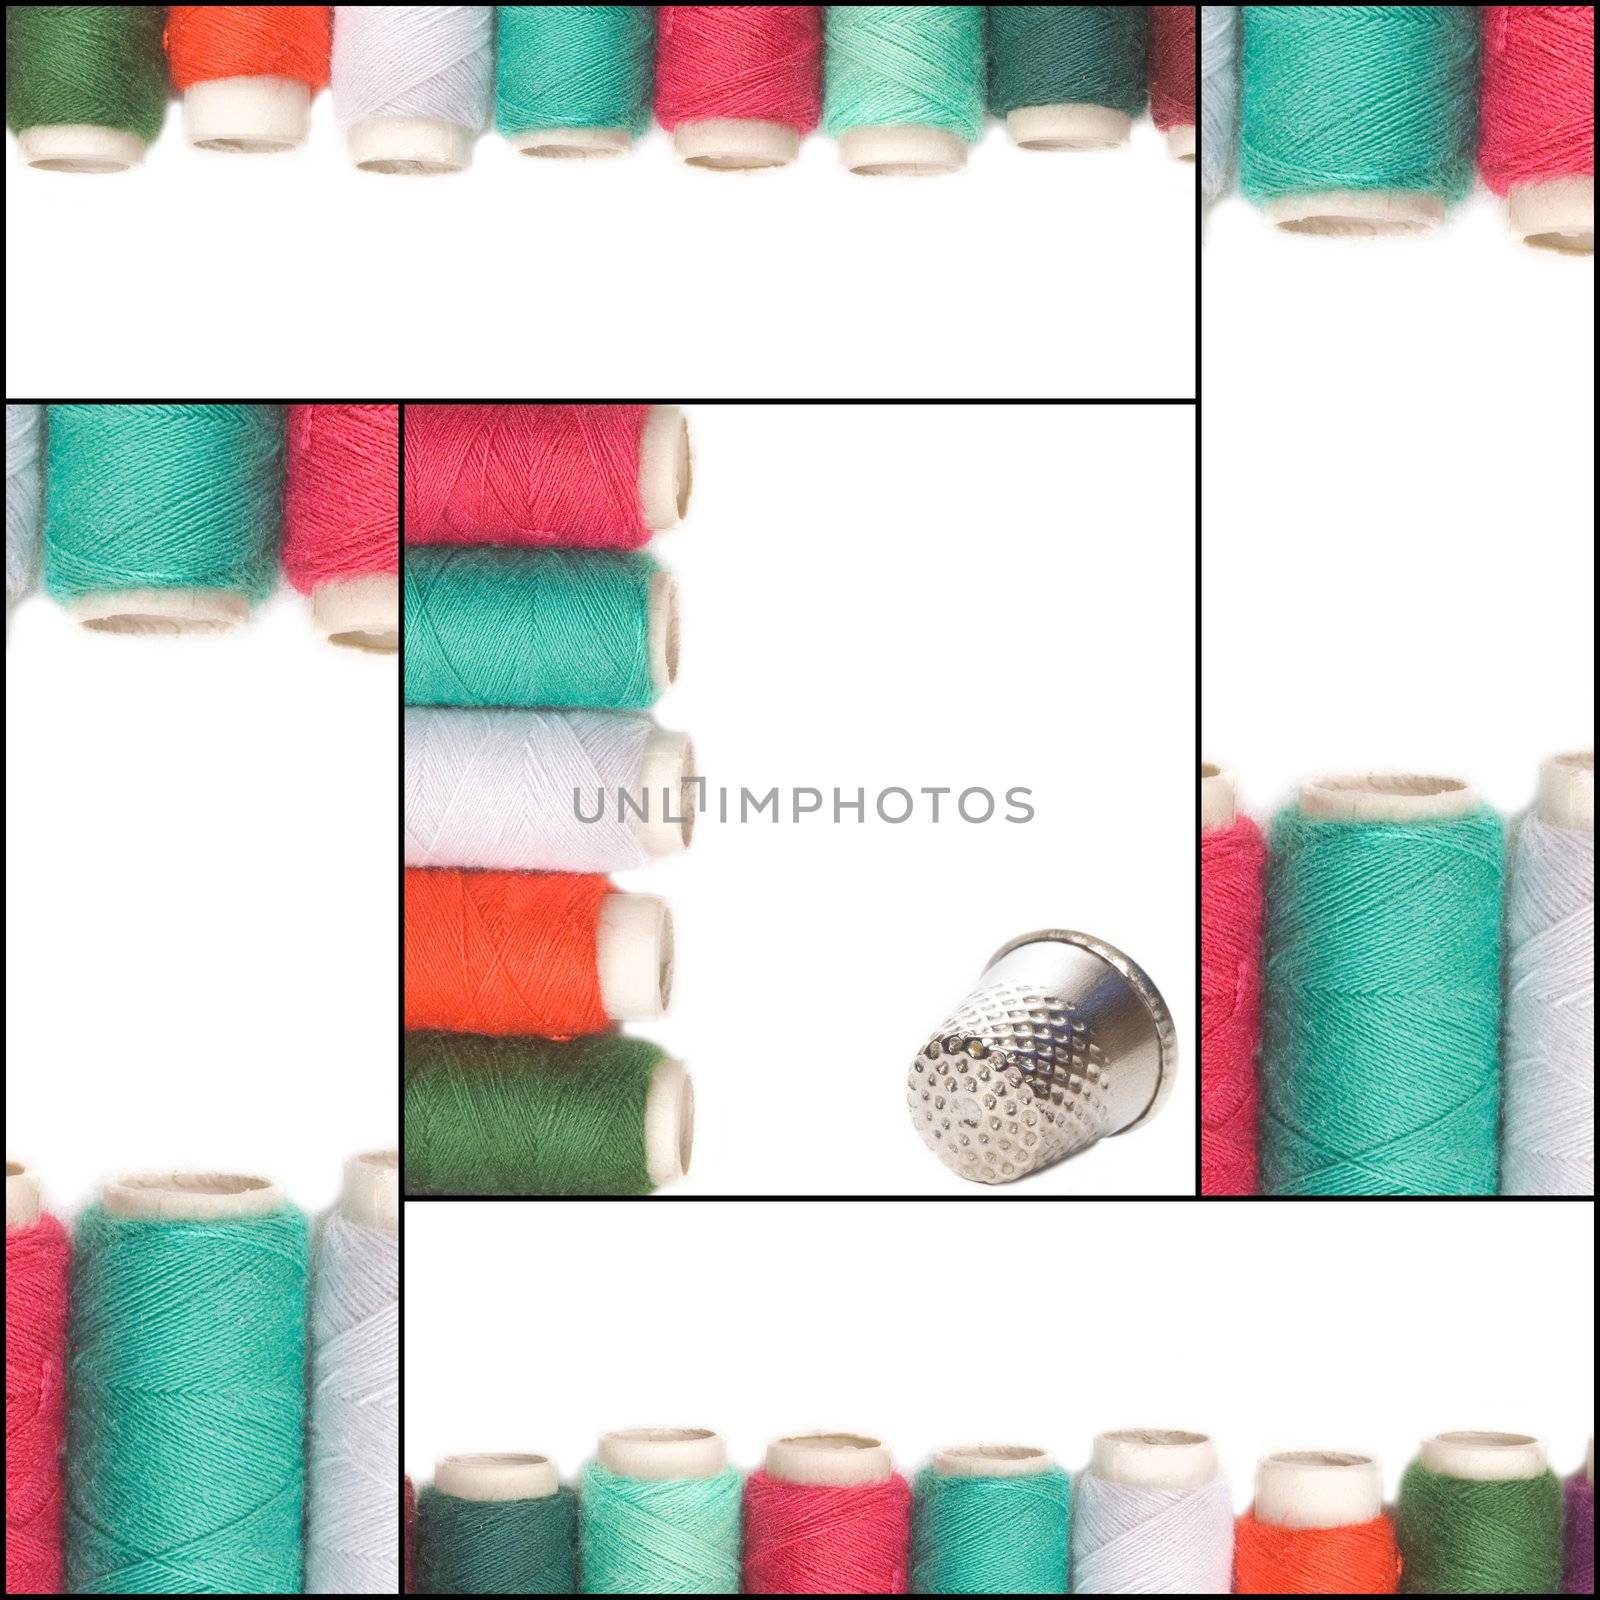 sewing card, colored thread and thimble by Carche